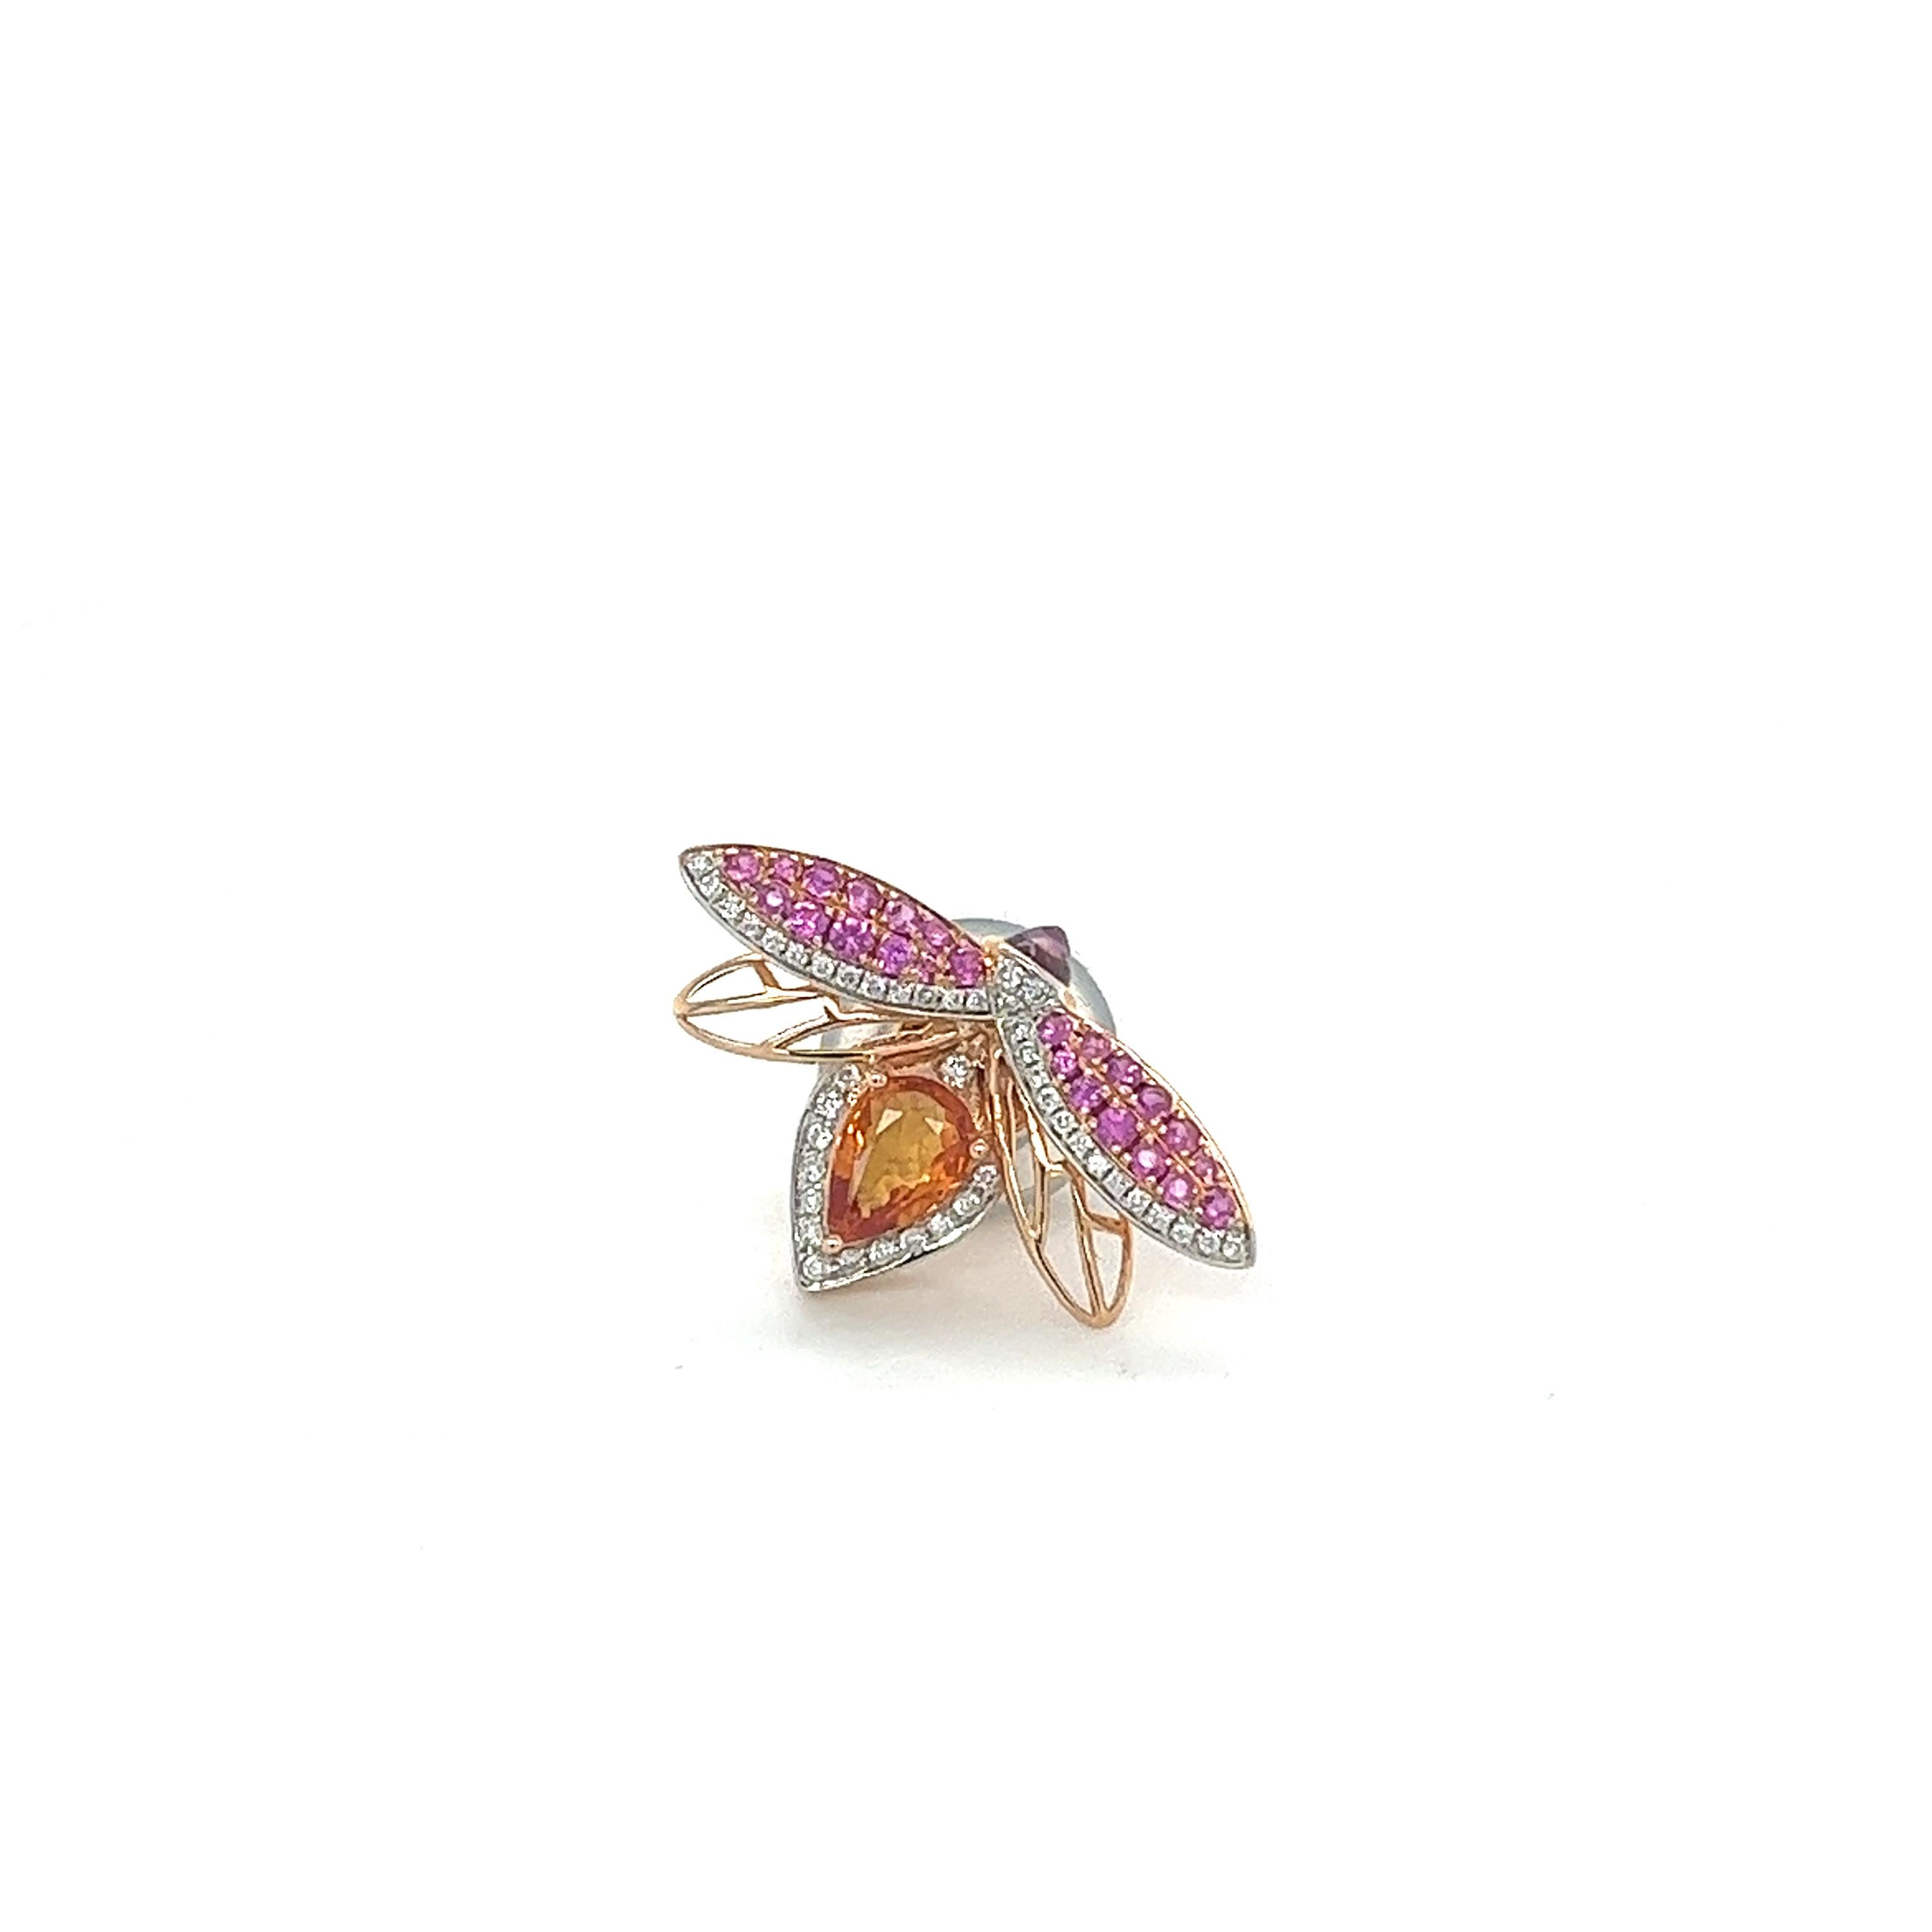 18 K Rose Gold Pink Sapphire Diamonds Bee Brooch

42 Diamonds 0.16 CT
1 Mandarin Garnet 0.74 CT
24 Pink Sapphires 0.29 CT
1 Purple Sapphire 0.23 CT
18K Rose Gold 2.49  GM

Sapphire’s are celestial stones. They entice with their sparkling color,